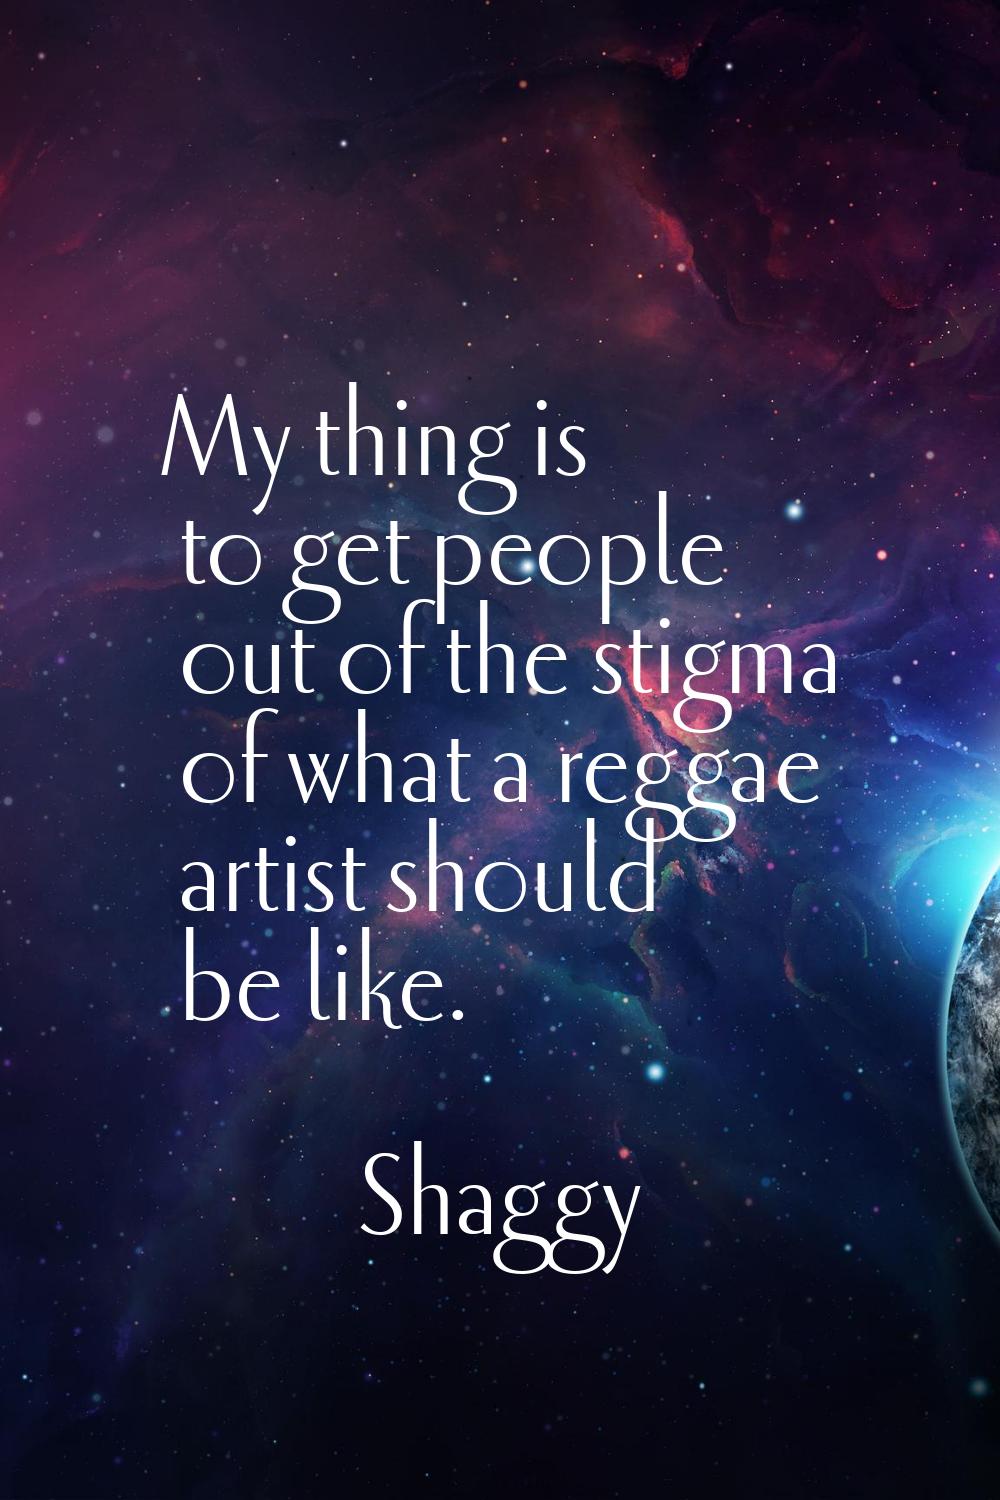 My thing is to get people out of the stigma of what a reggae artist should be like.